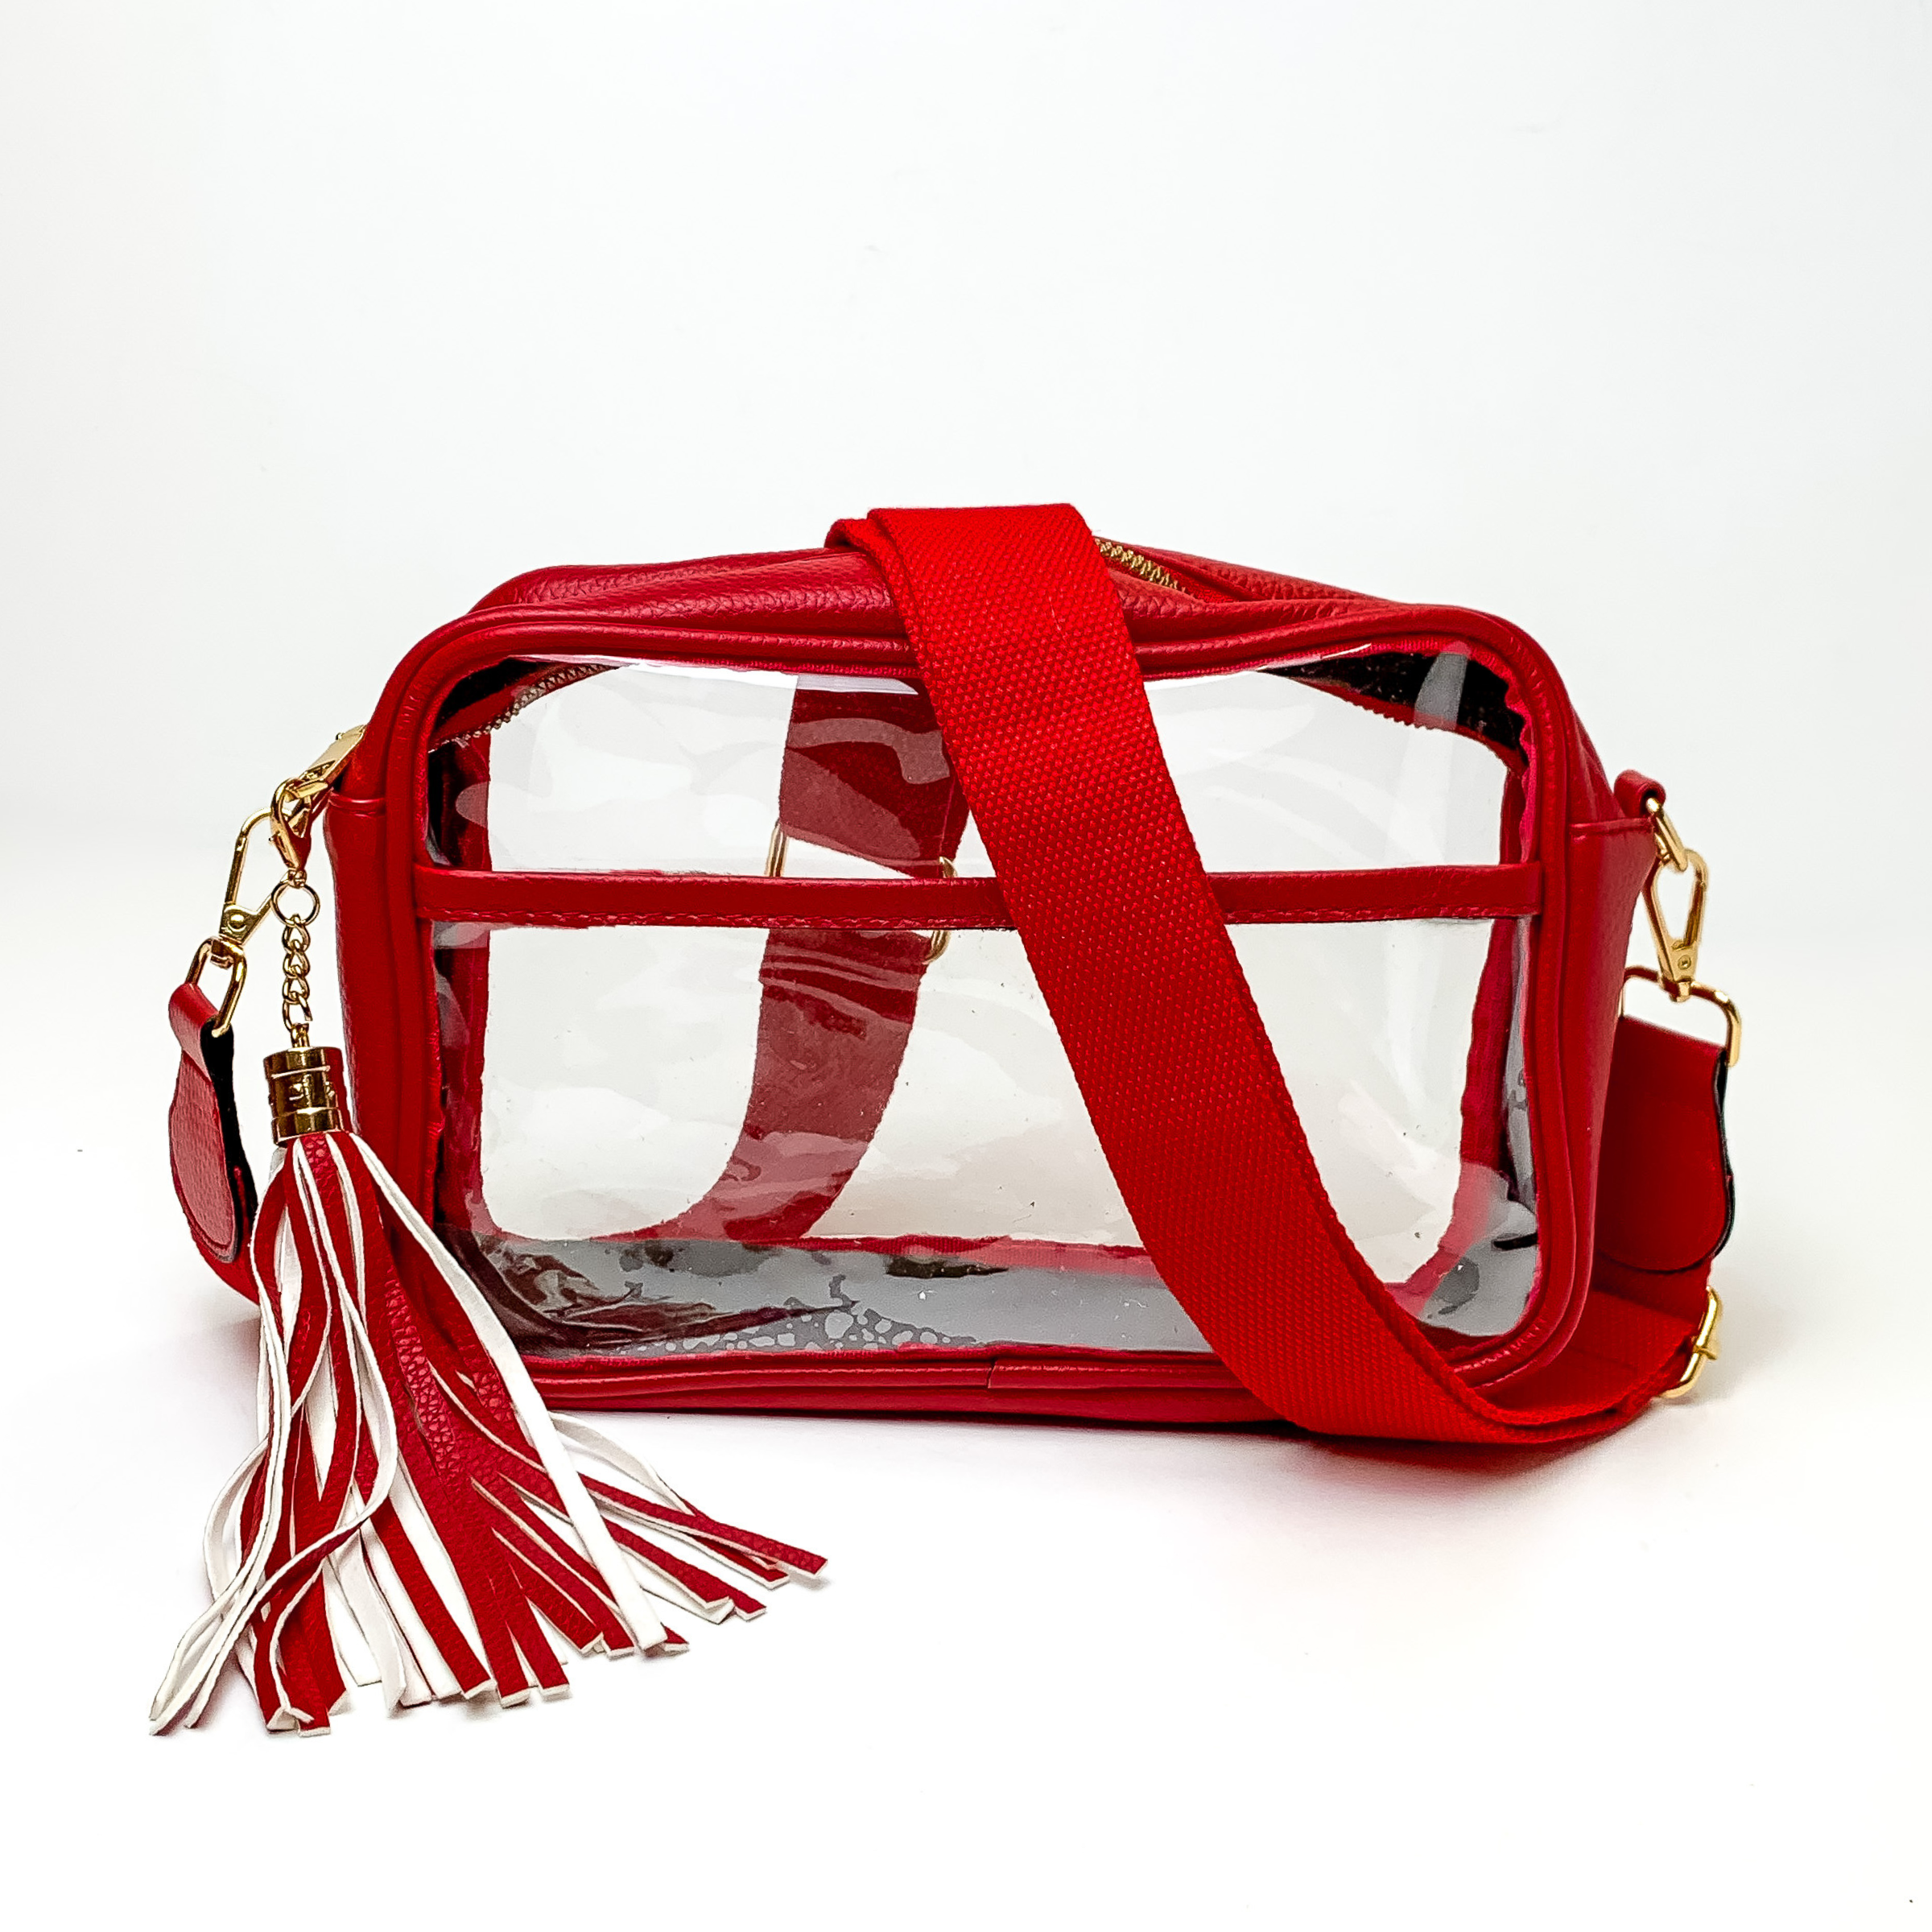 Pictured on a white background is a clear, rectangle purse with a red outline. This purse includes gold accessories, a red strap that is draped over the purse, and a red and white fringe tassel. 